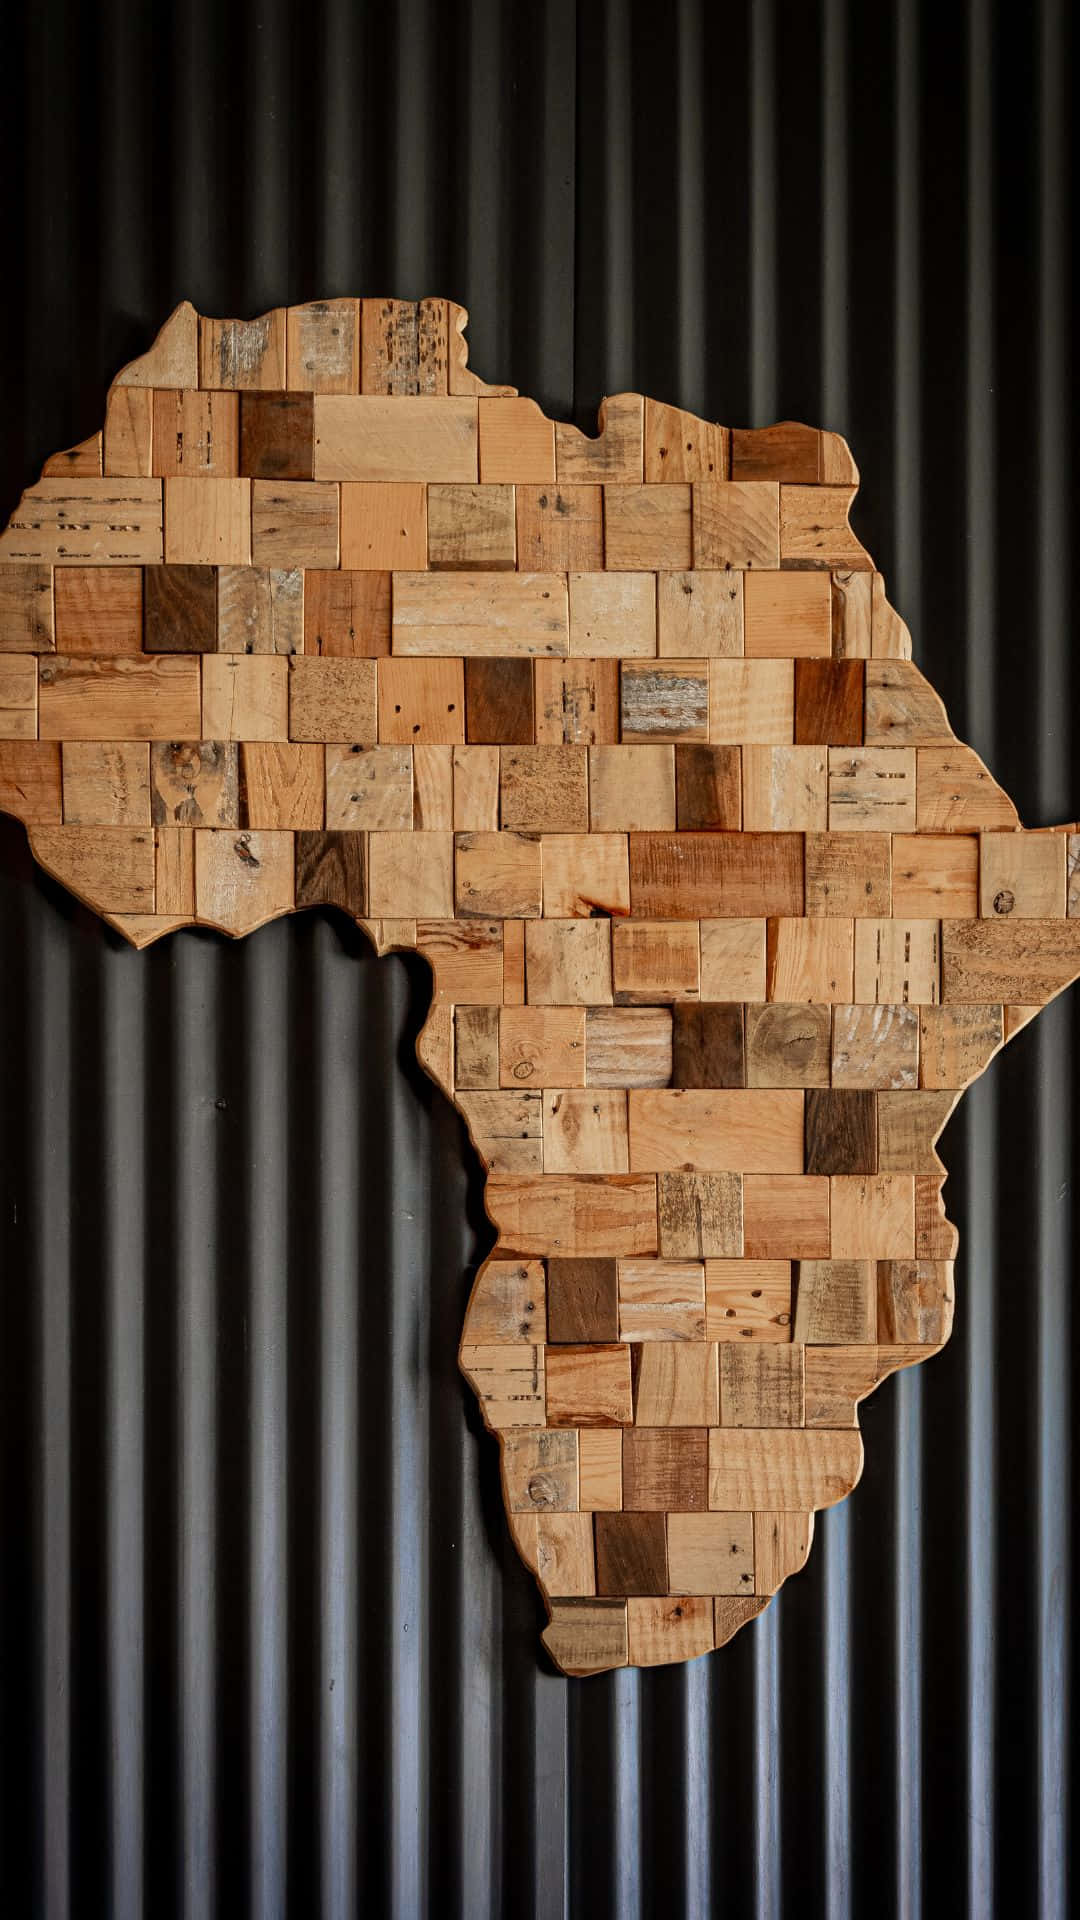 Marvelous Africa Map Wooden Mosaic Background